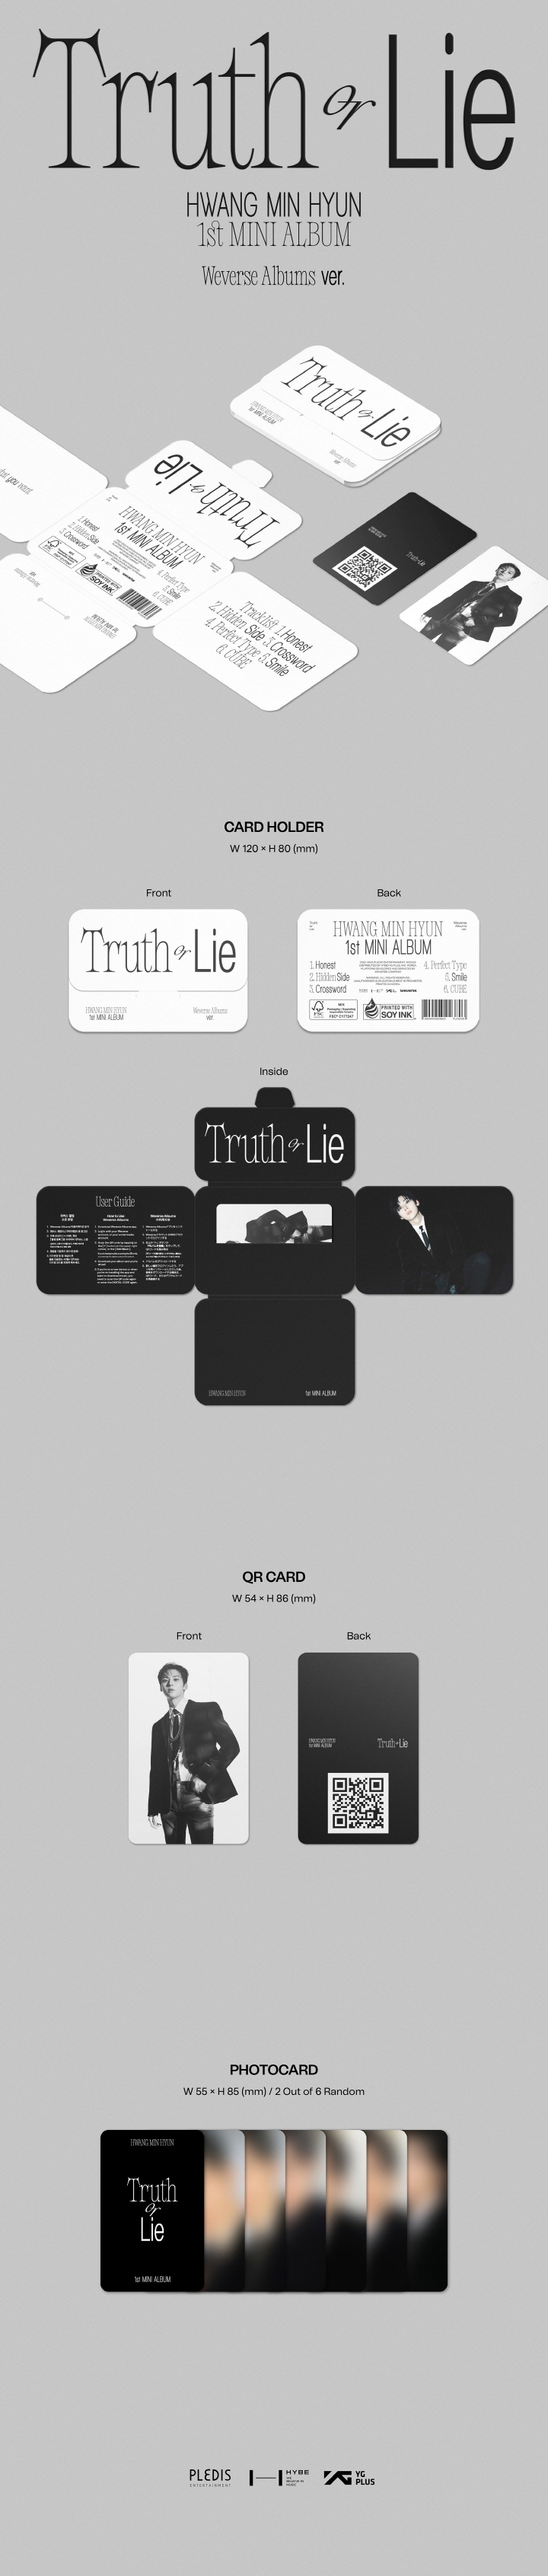  HWANG MINHYUN  Truth or Lie 1st MINI ALBUM Weverse Albums ver  and  Photocard with weverse shop gift